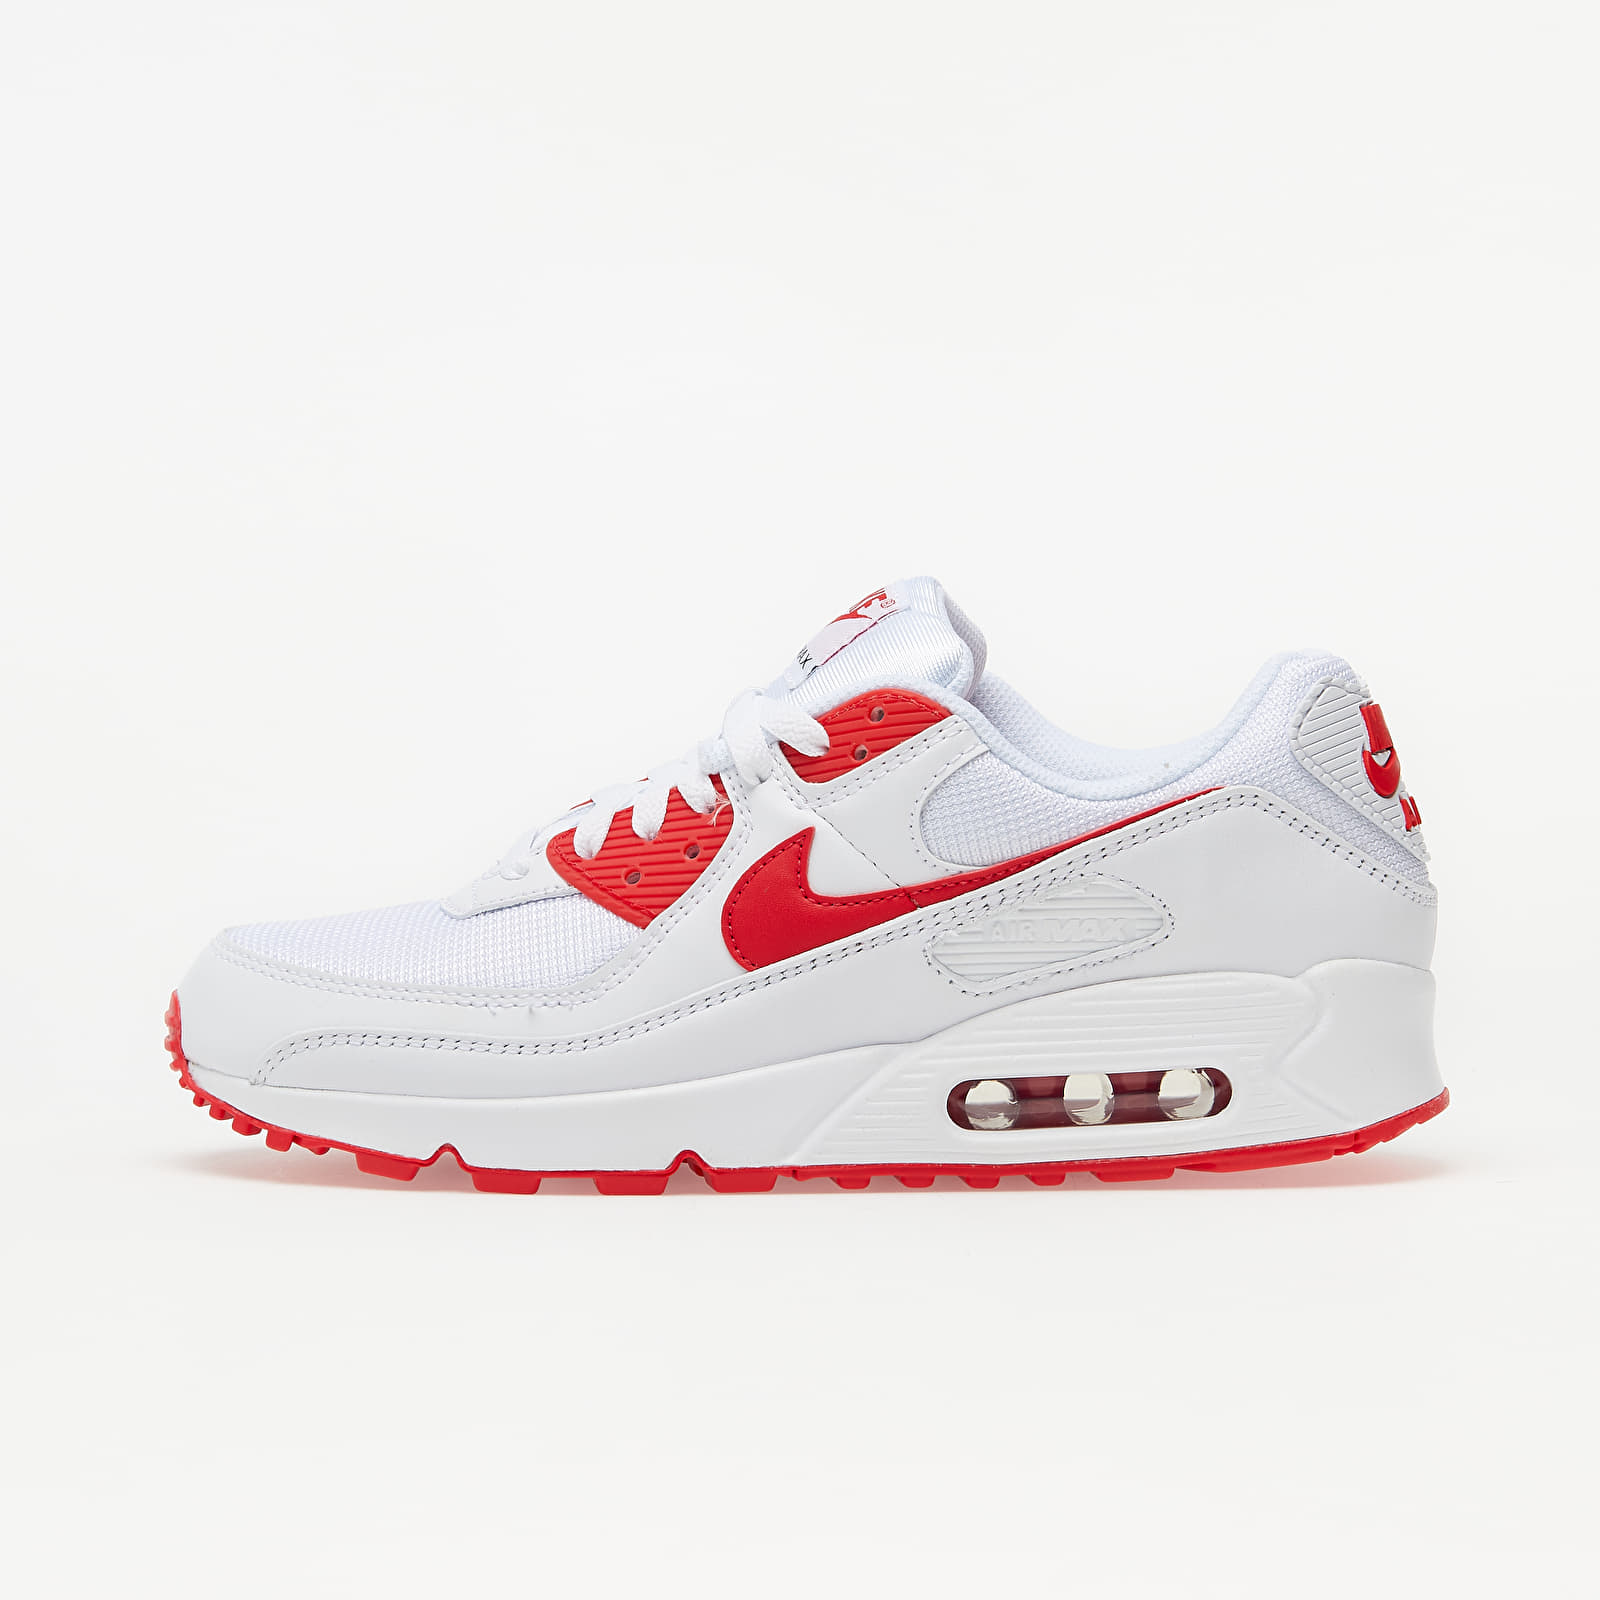 Chaussures et baskets homme Nike Air Max 90 White/ Hyper Red-Black